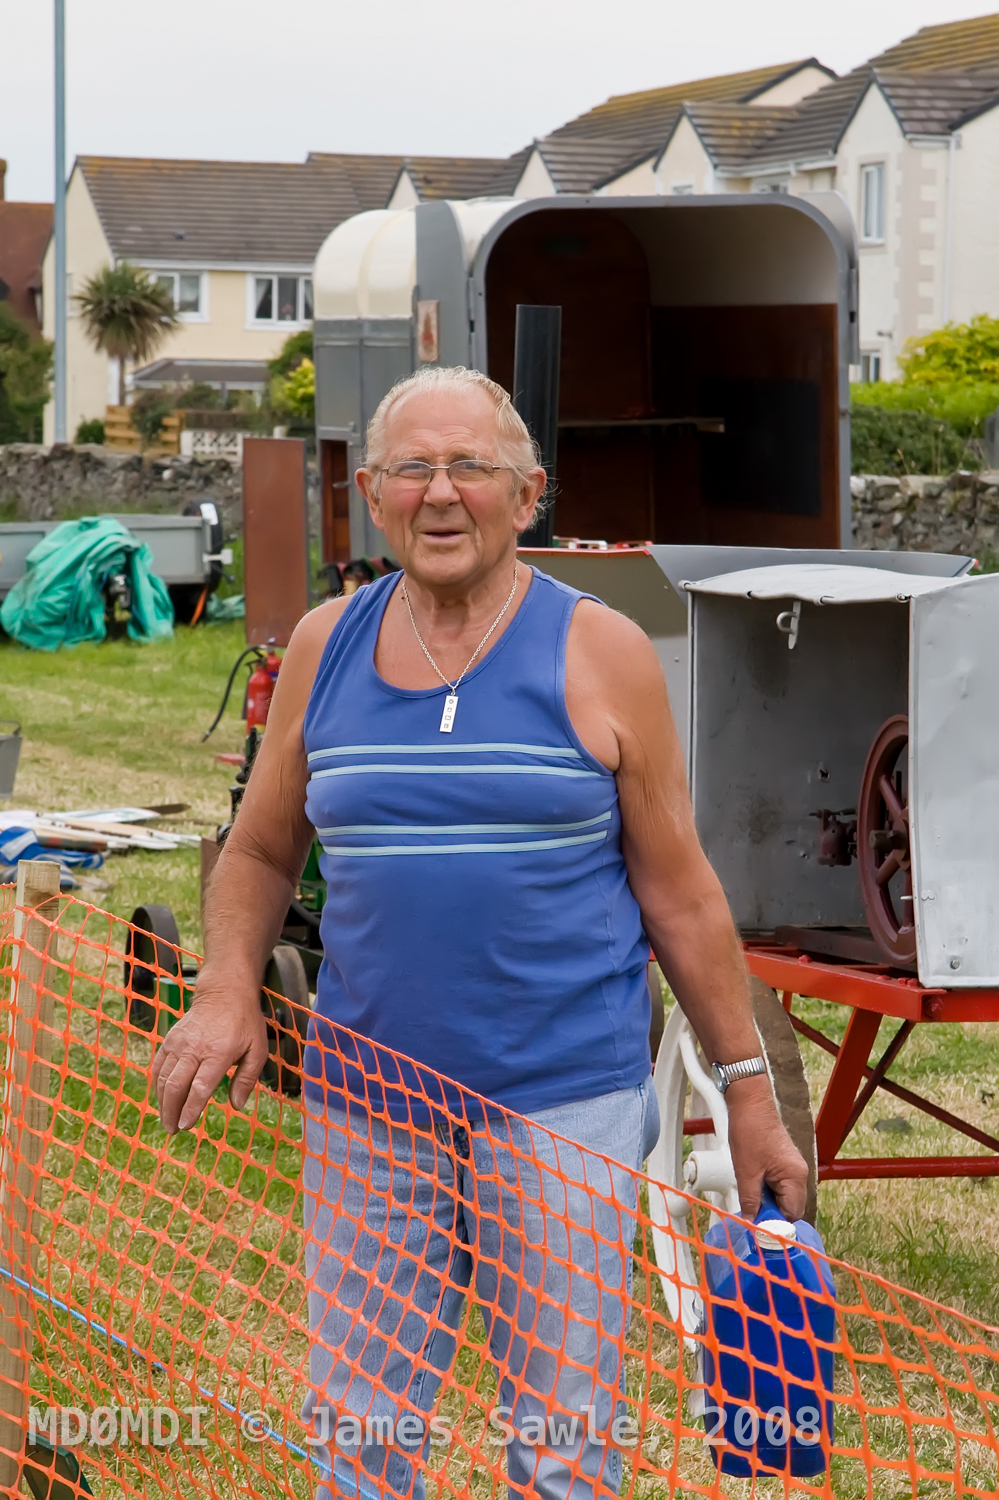 Dave Corkish (2D0RGW) who was one of the main organizers behind the Mad Sunday Show in Port St. Mary